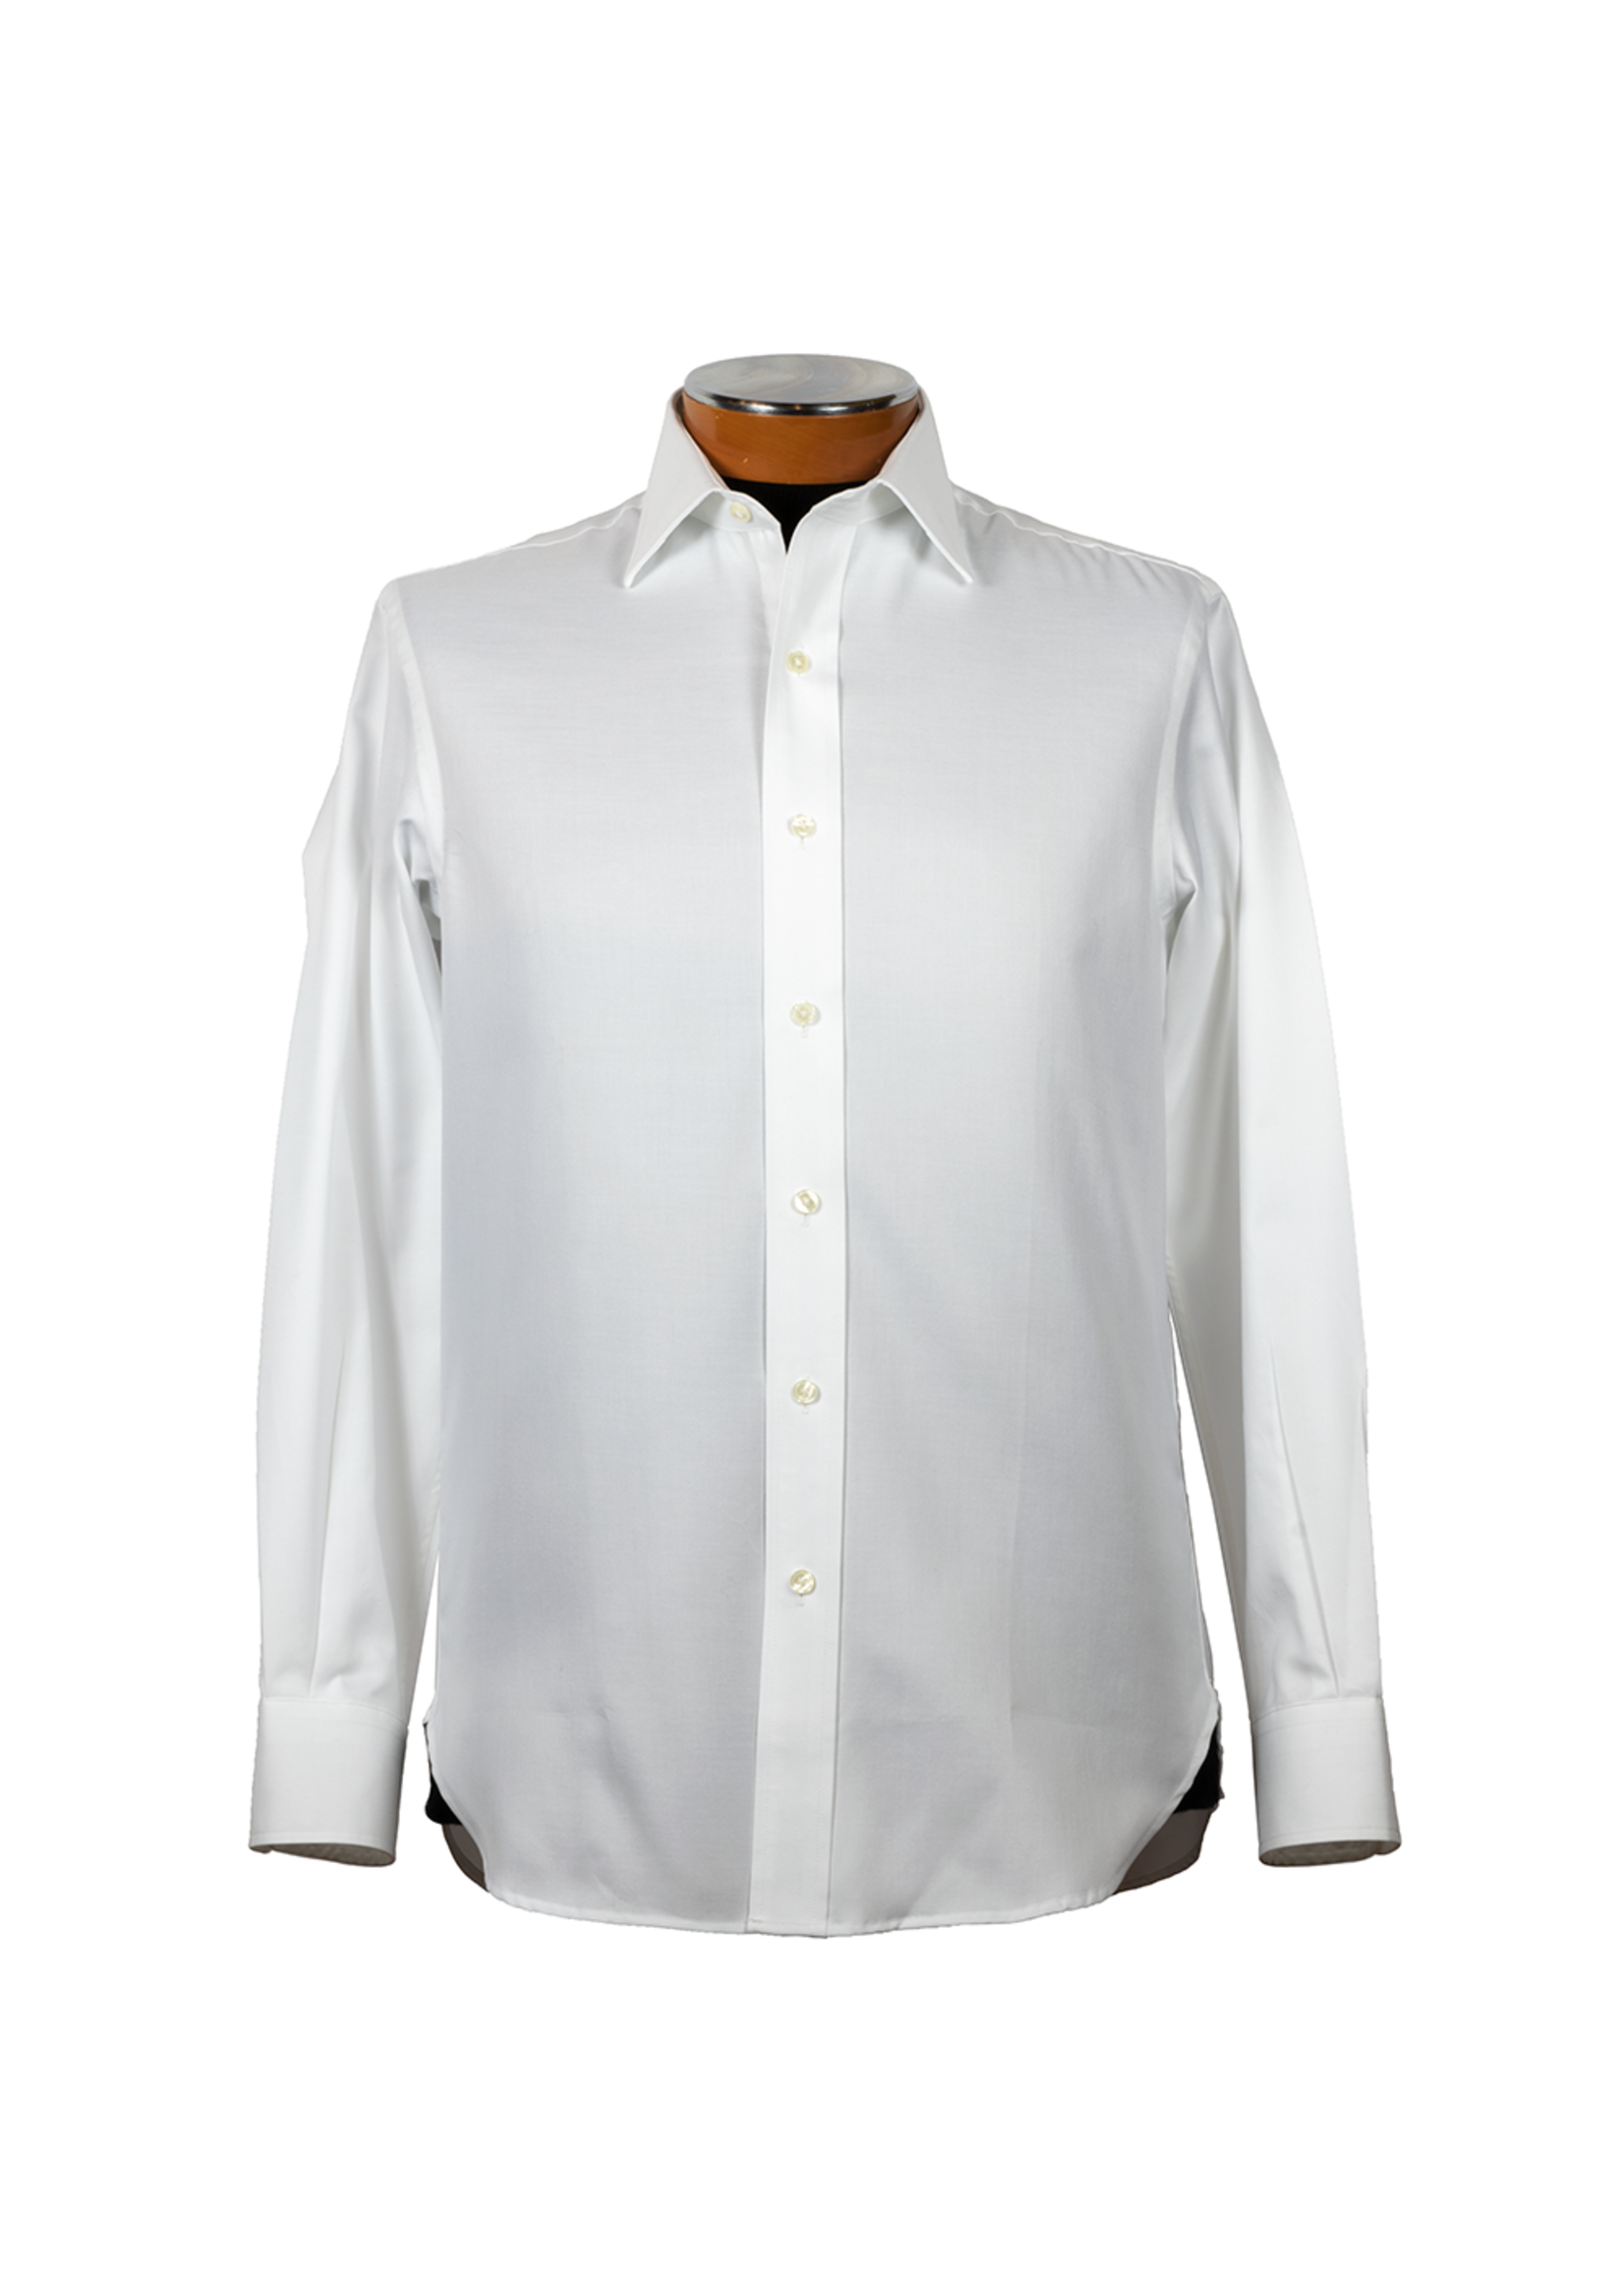 Drinkwater's Drinkwater's White Queen's Oxford  Dress Shirt